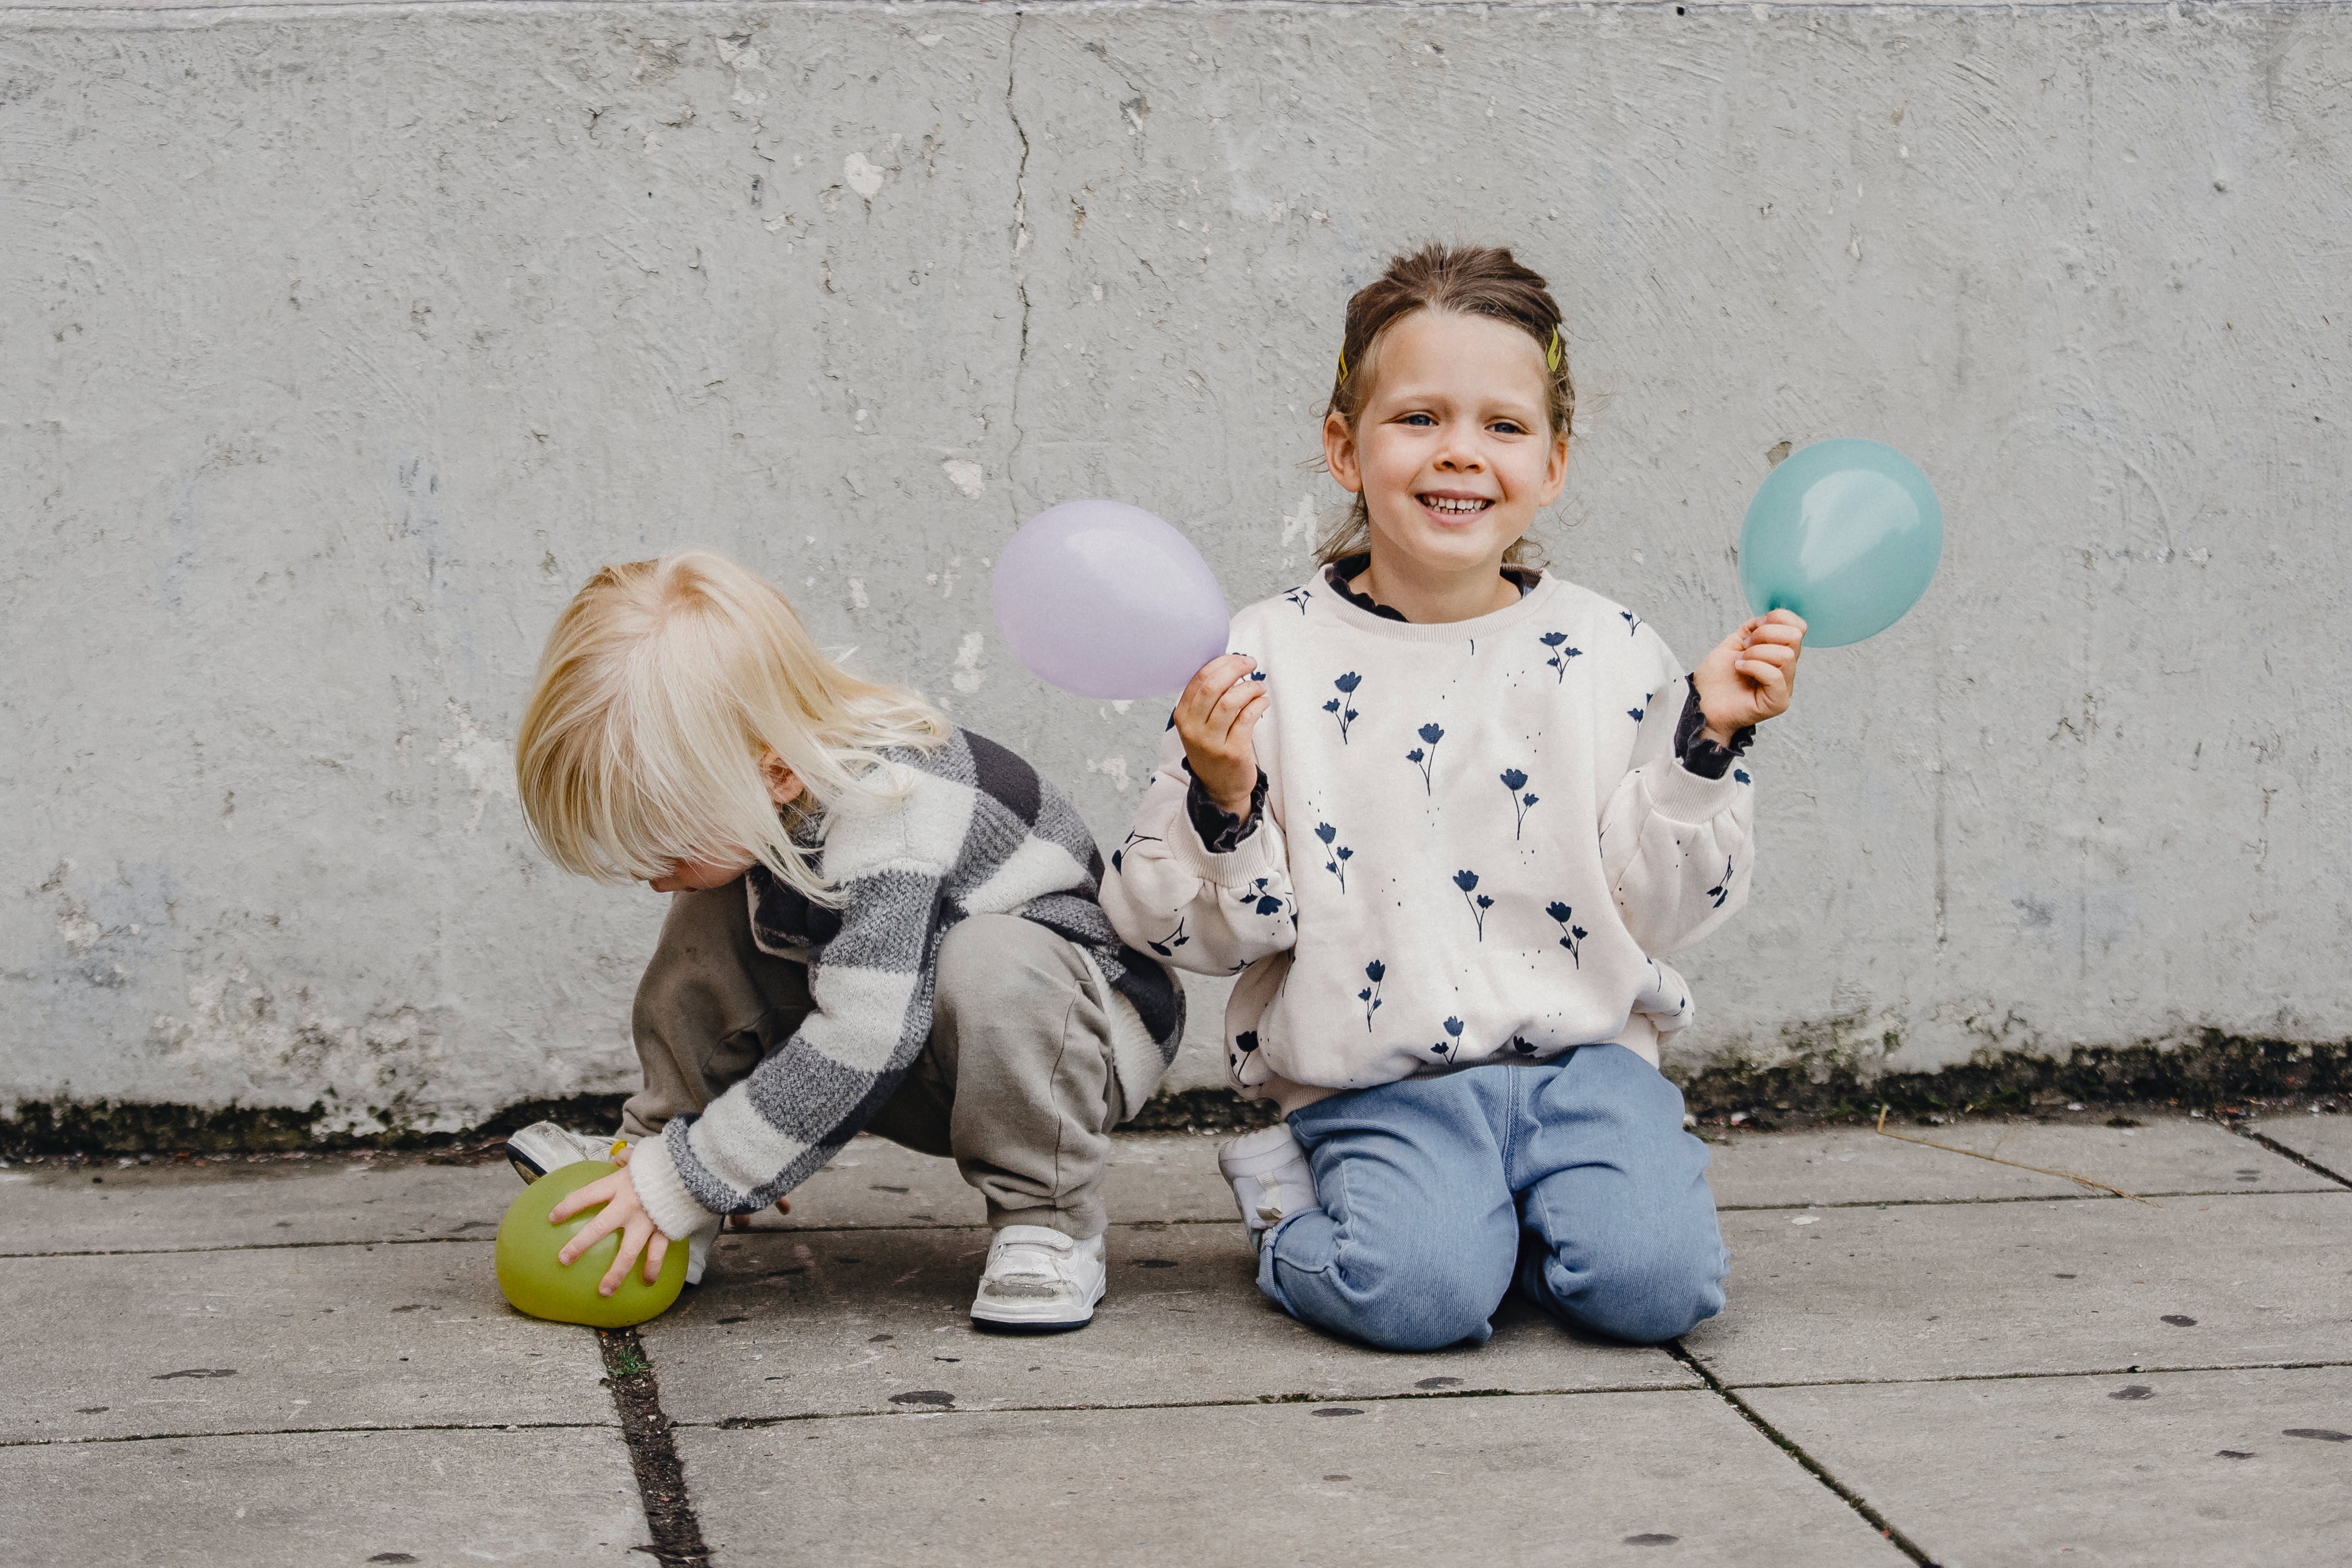 Boy and girl playing with balloons